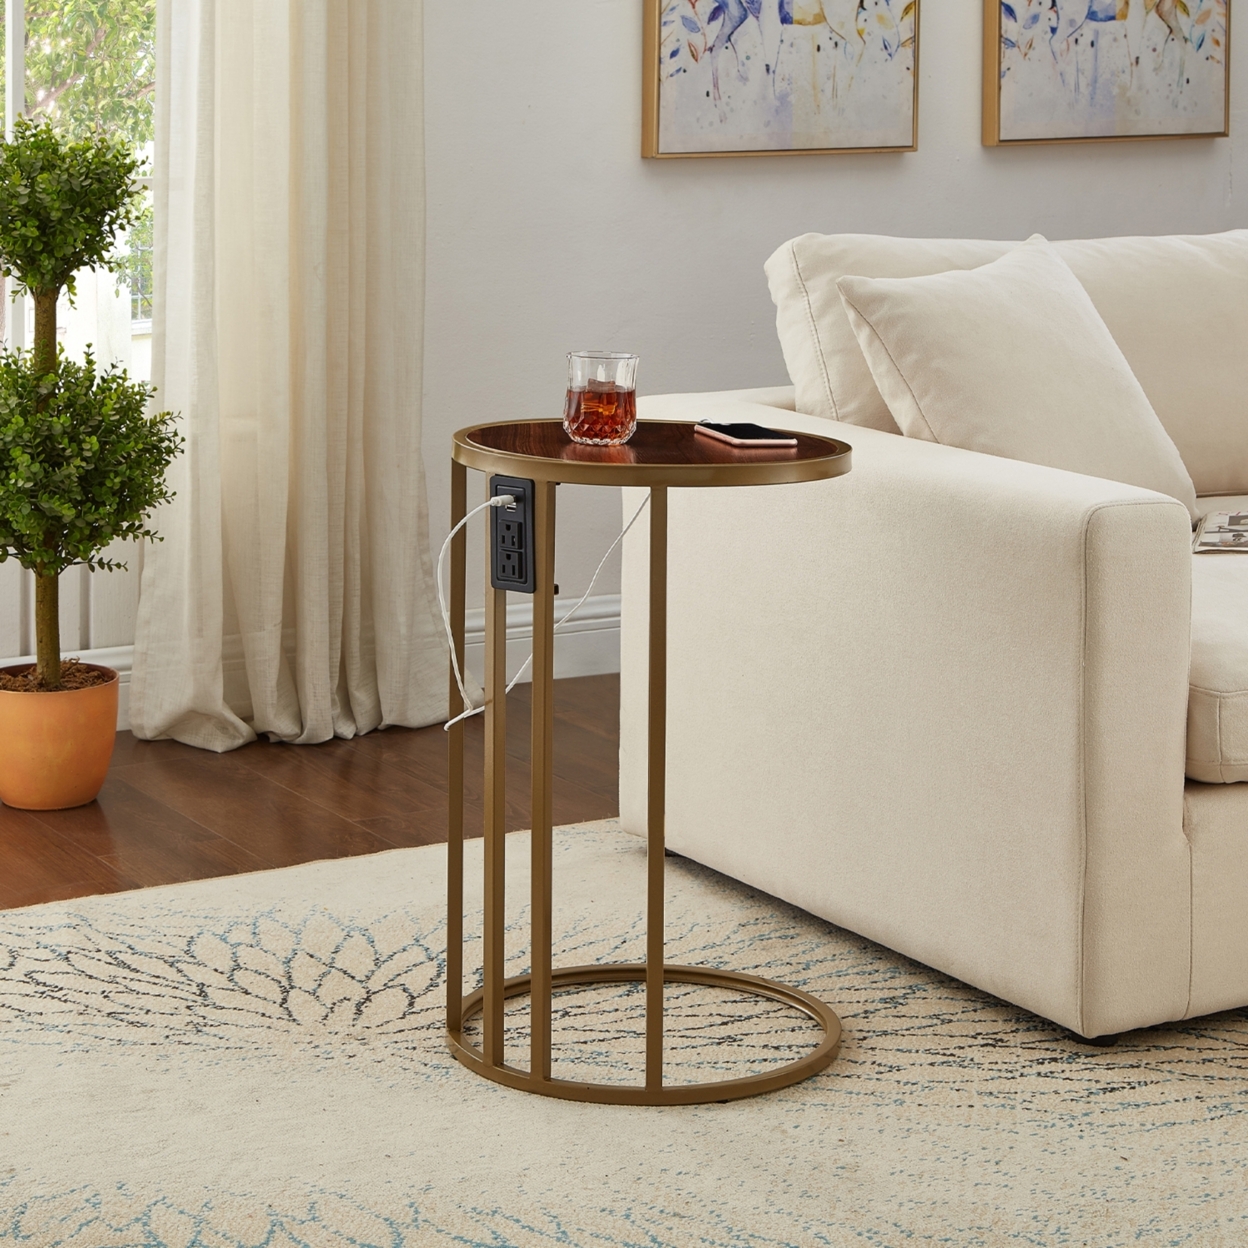 Galilea End Table - 2 USB Charging Ports 2 Outlets Power Plug - walnut/gold